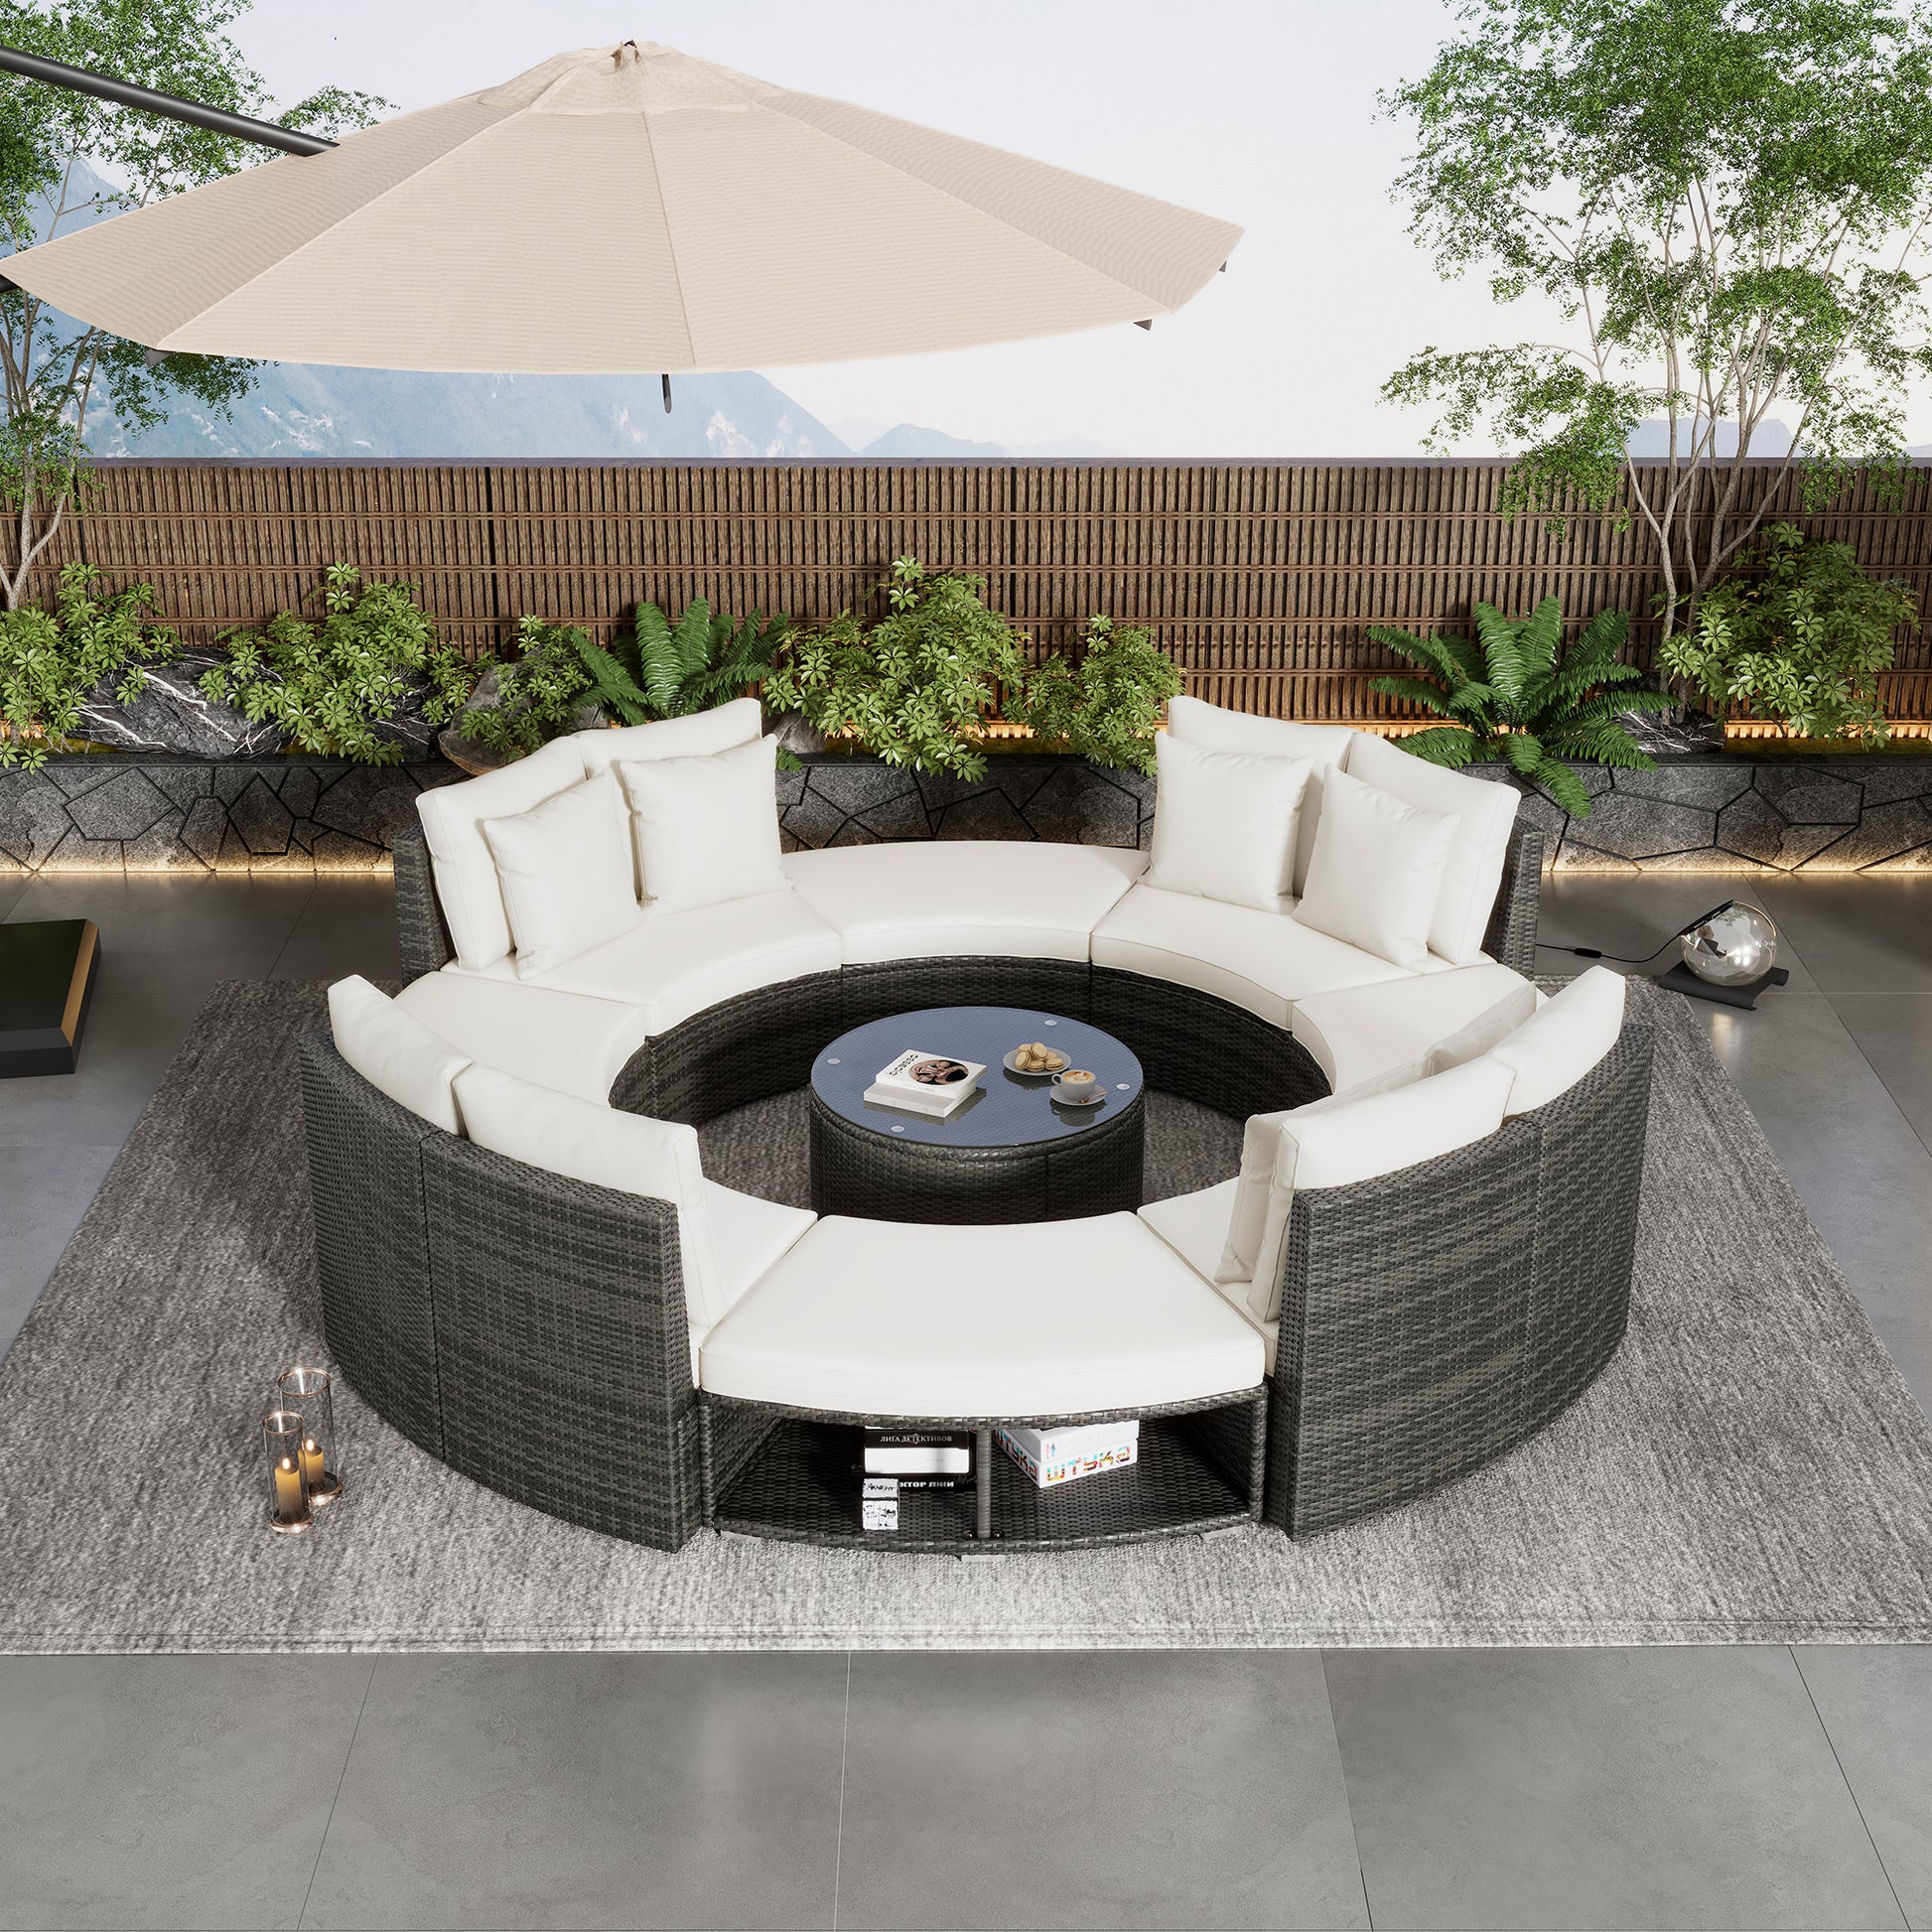 9-Piece Outdoor Patio Furniture Luxury Circular Outdoor Sofa Set Rattan Wicker Sectional Sofa Lounge Set with Tempered Glass Coffee Table MLNshops